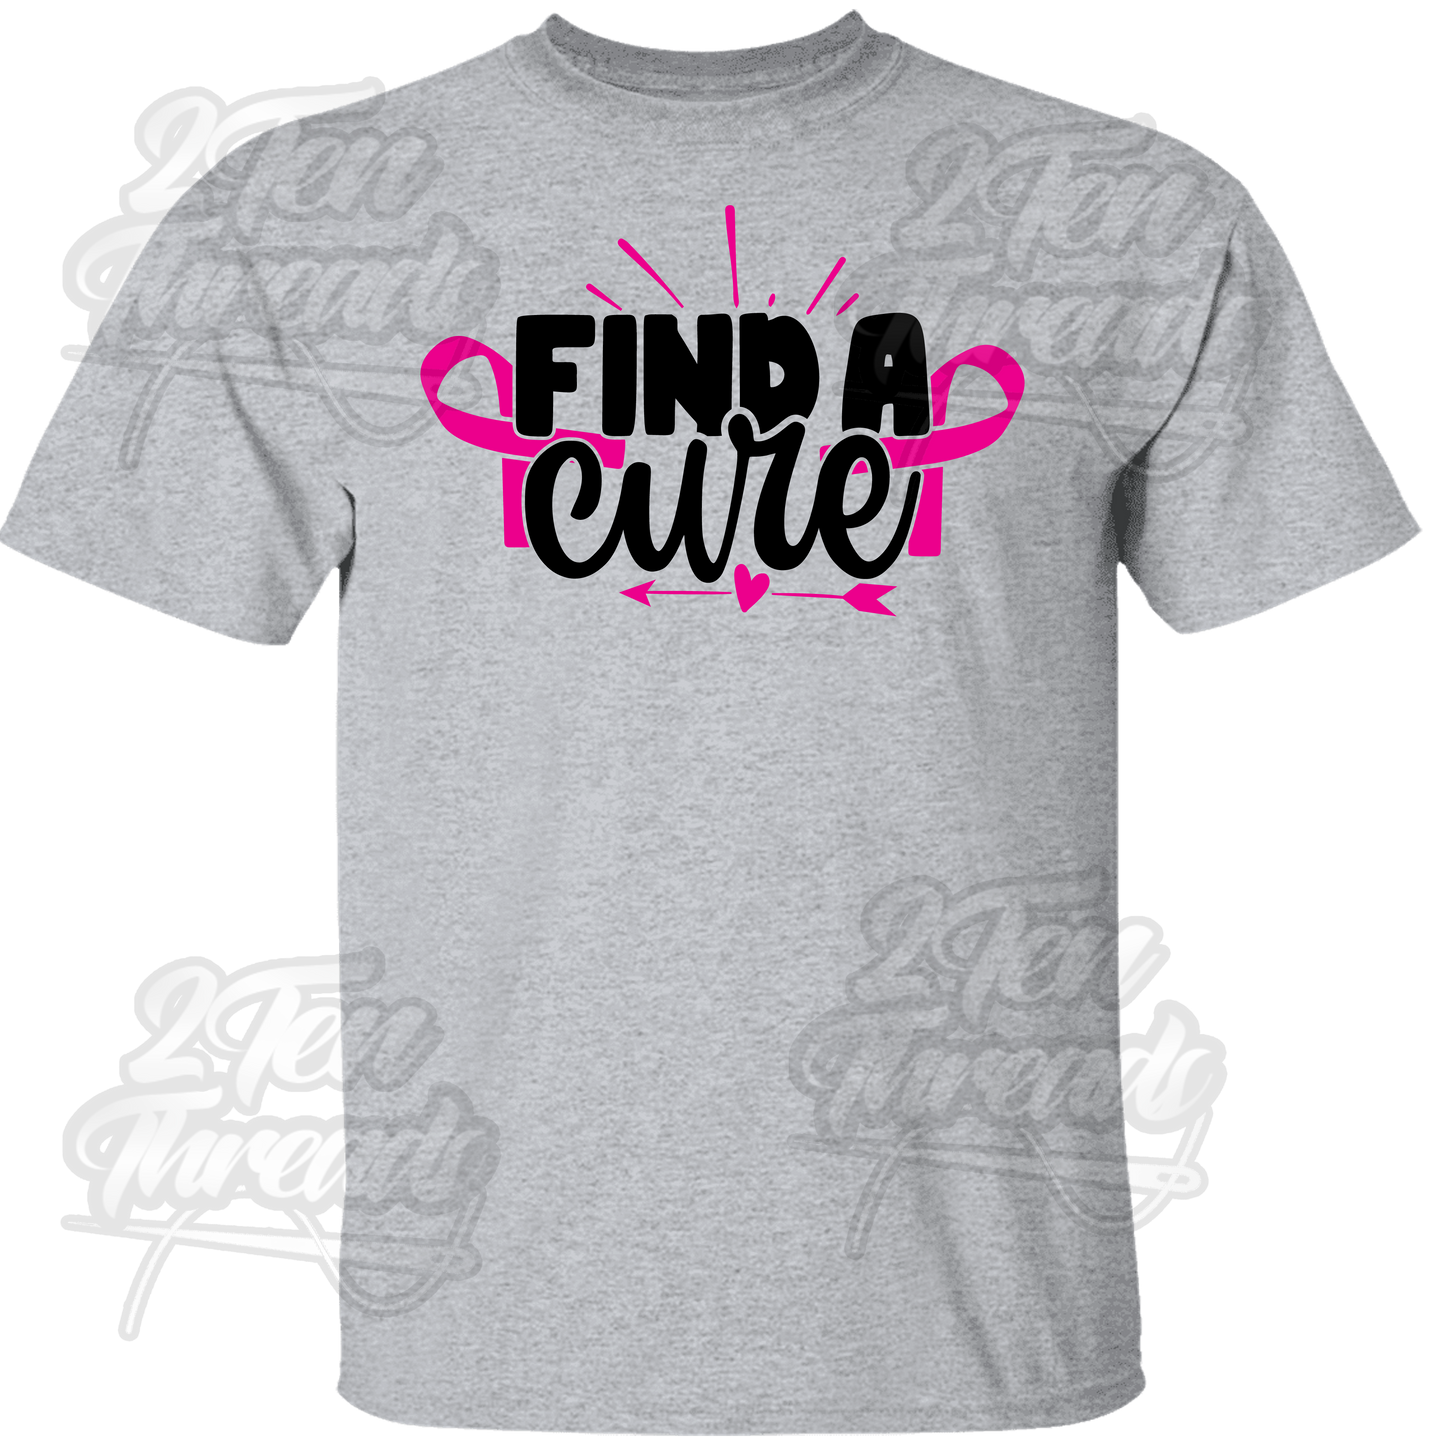 Find a Cure Shirt